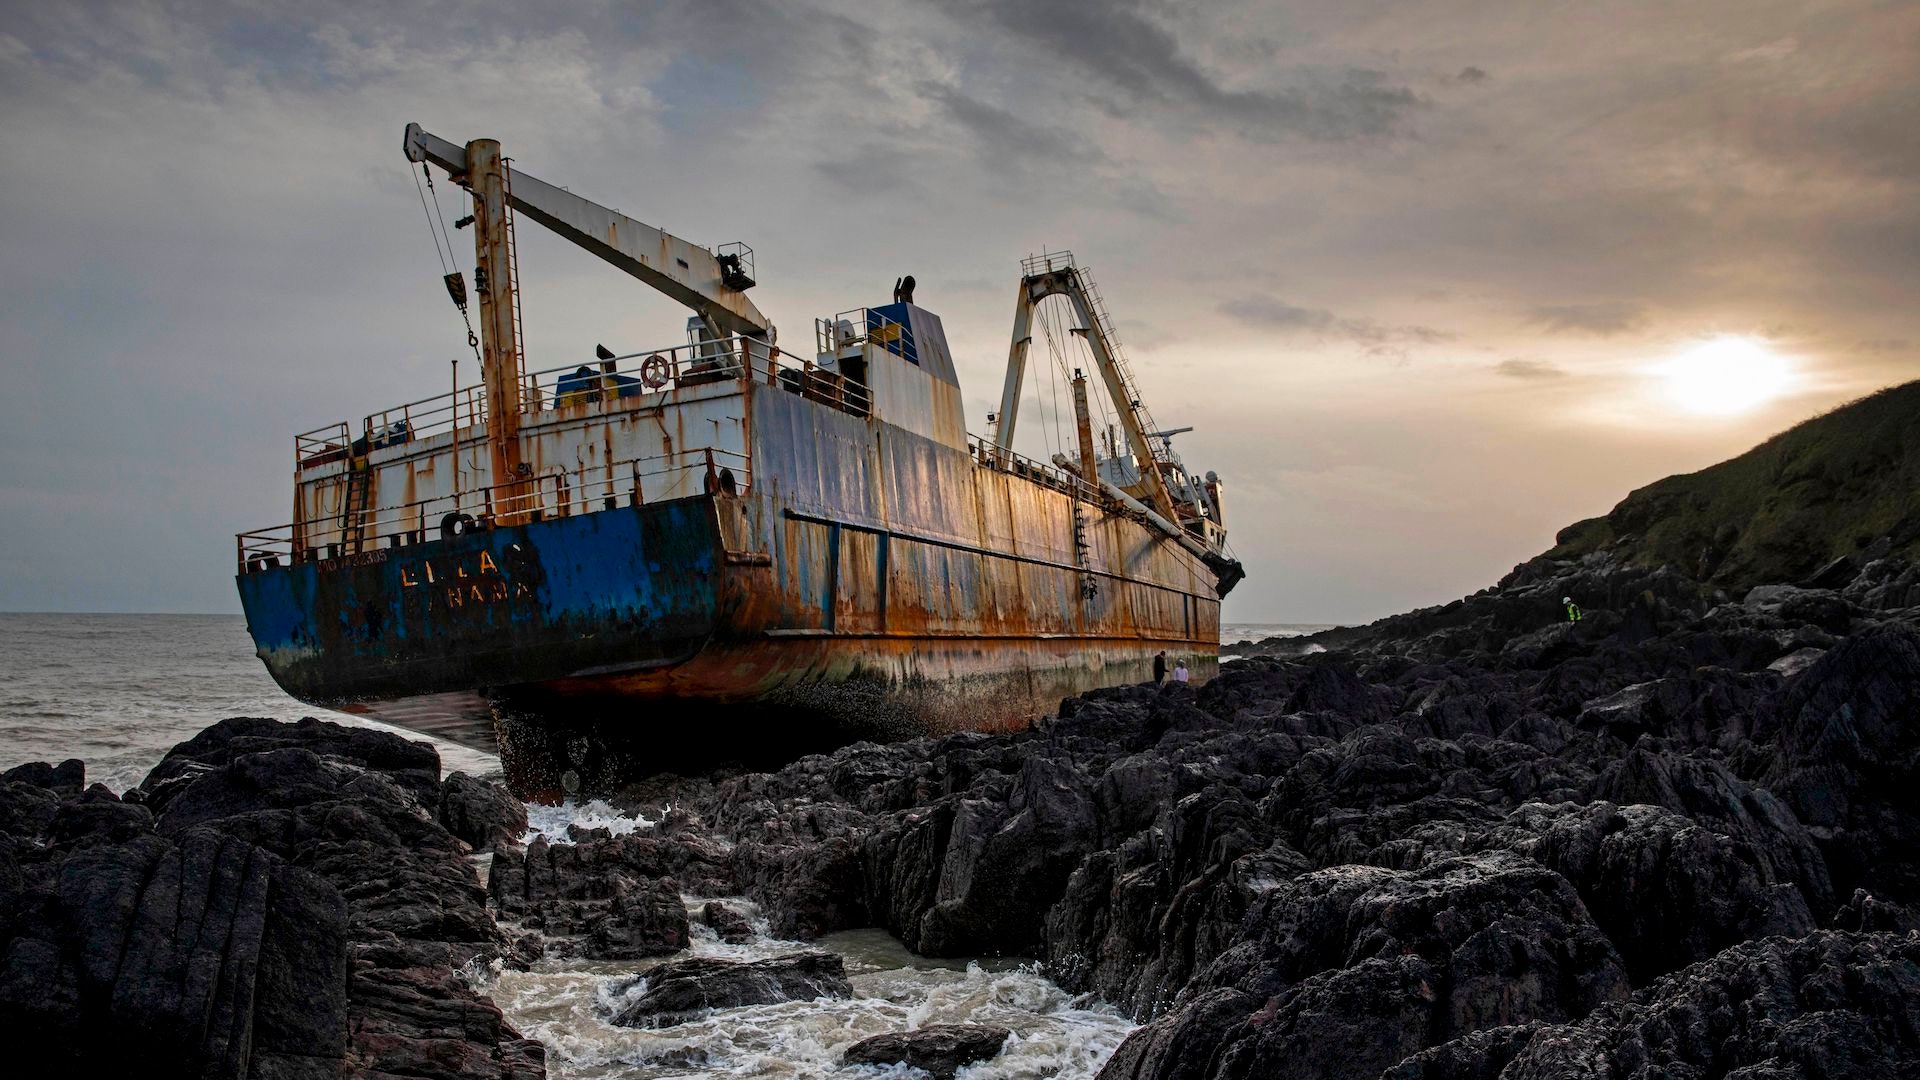 The mysterious final voyage of the Alta, Ireland's doomed ghost ship